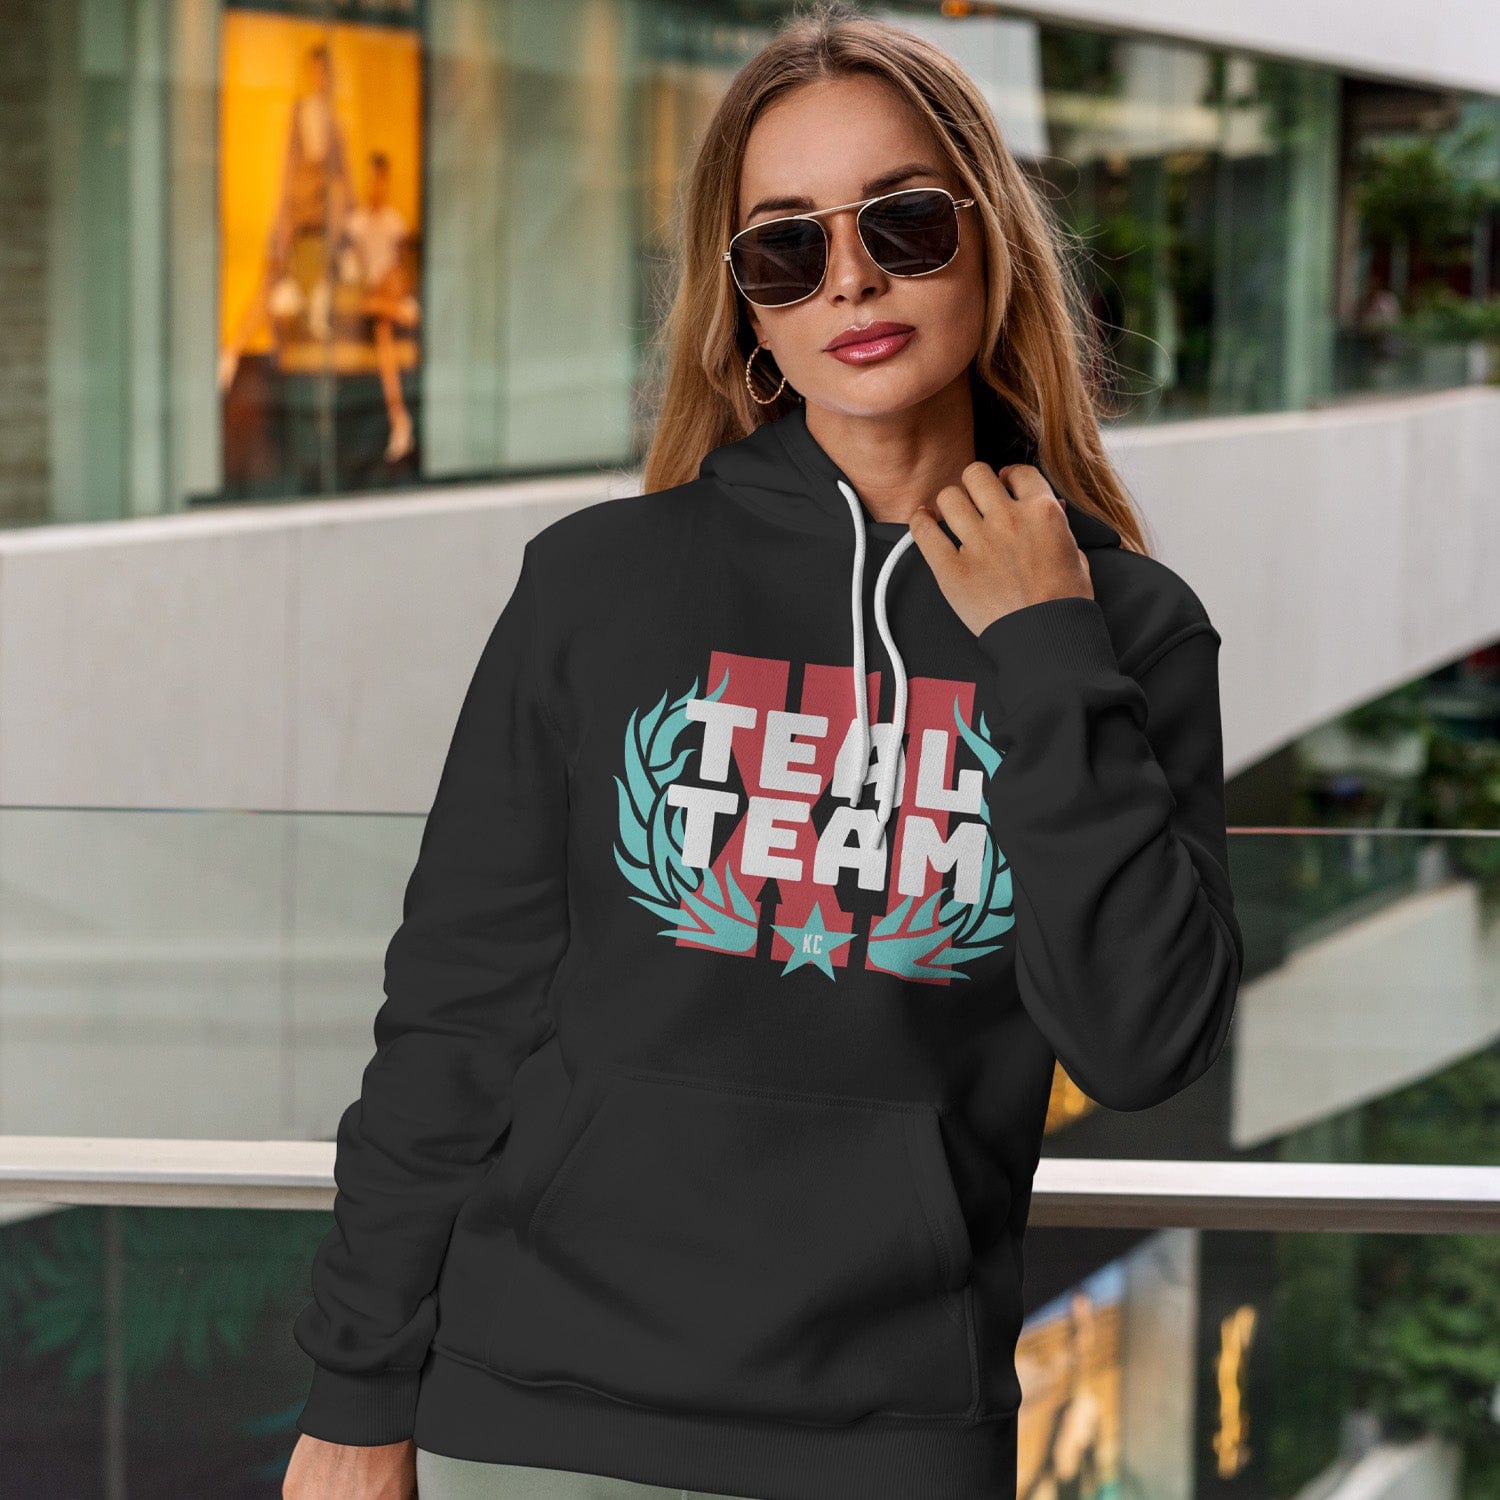 KC Swag Kansas City Current TEAL TEAM XI on black fleece pullover hoodie worn by female model in shopping mall